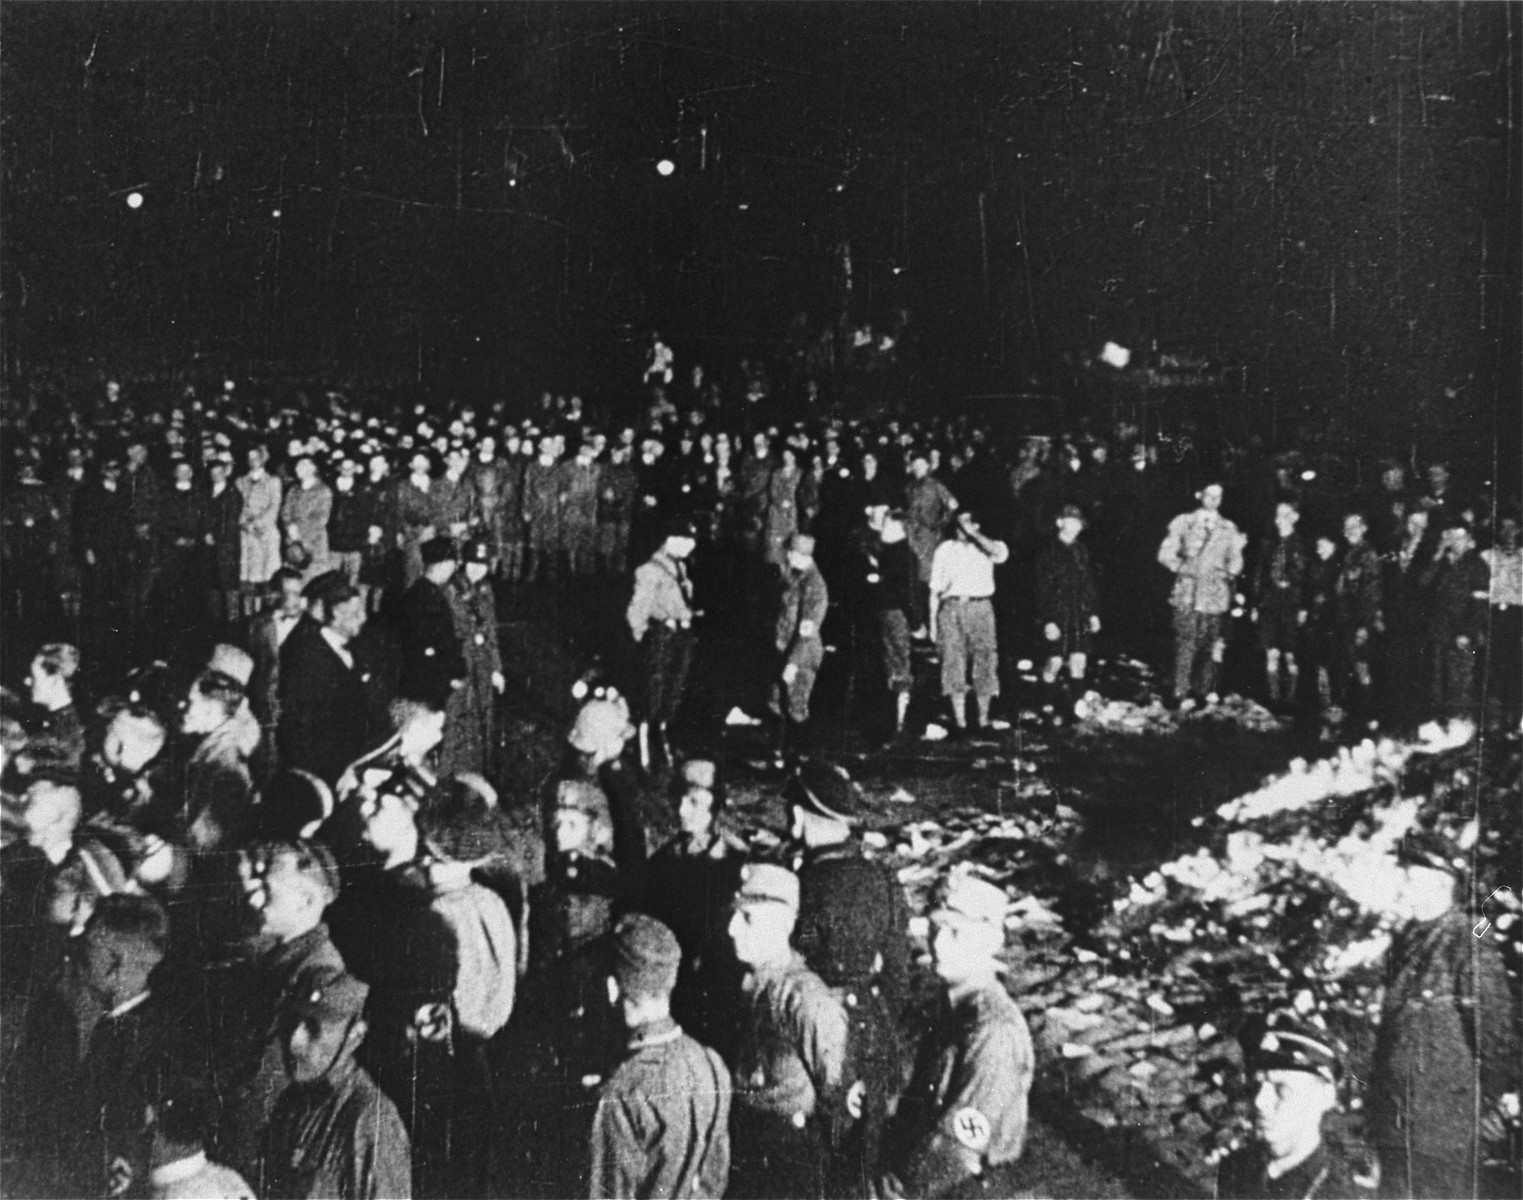 The public burning of "un-German" books by members of the SA and university students on the Opernplatz in Berlin. 

Still from a motion picture.